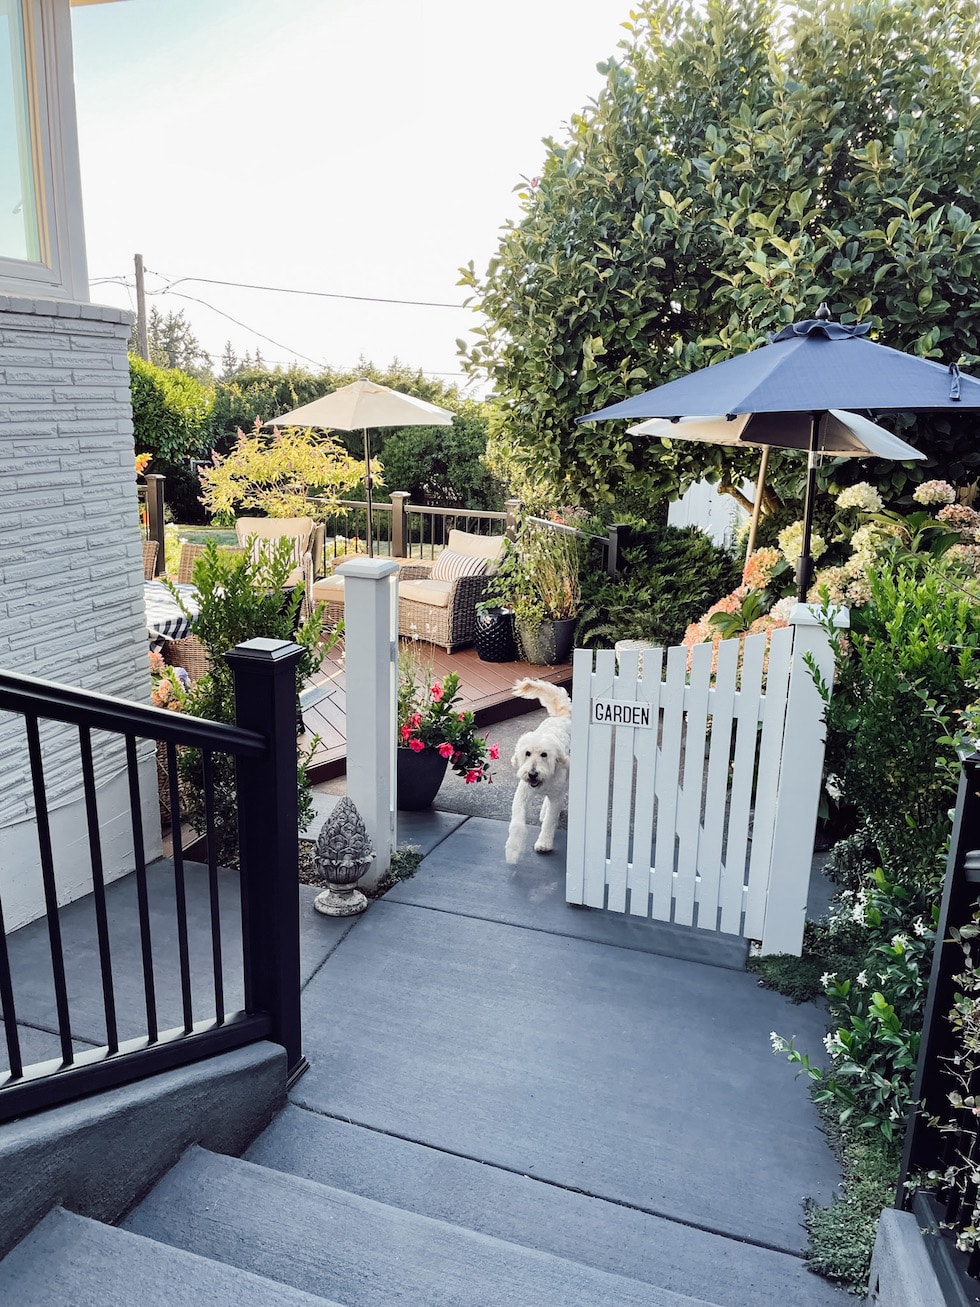 Our Trex Deck: Five Years Later